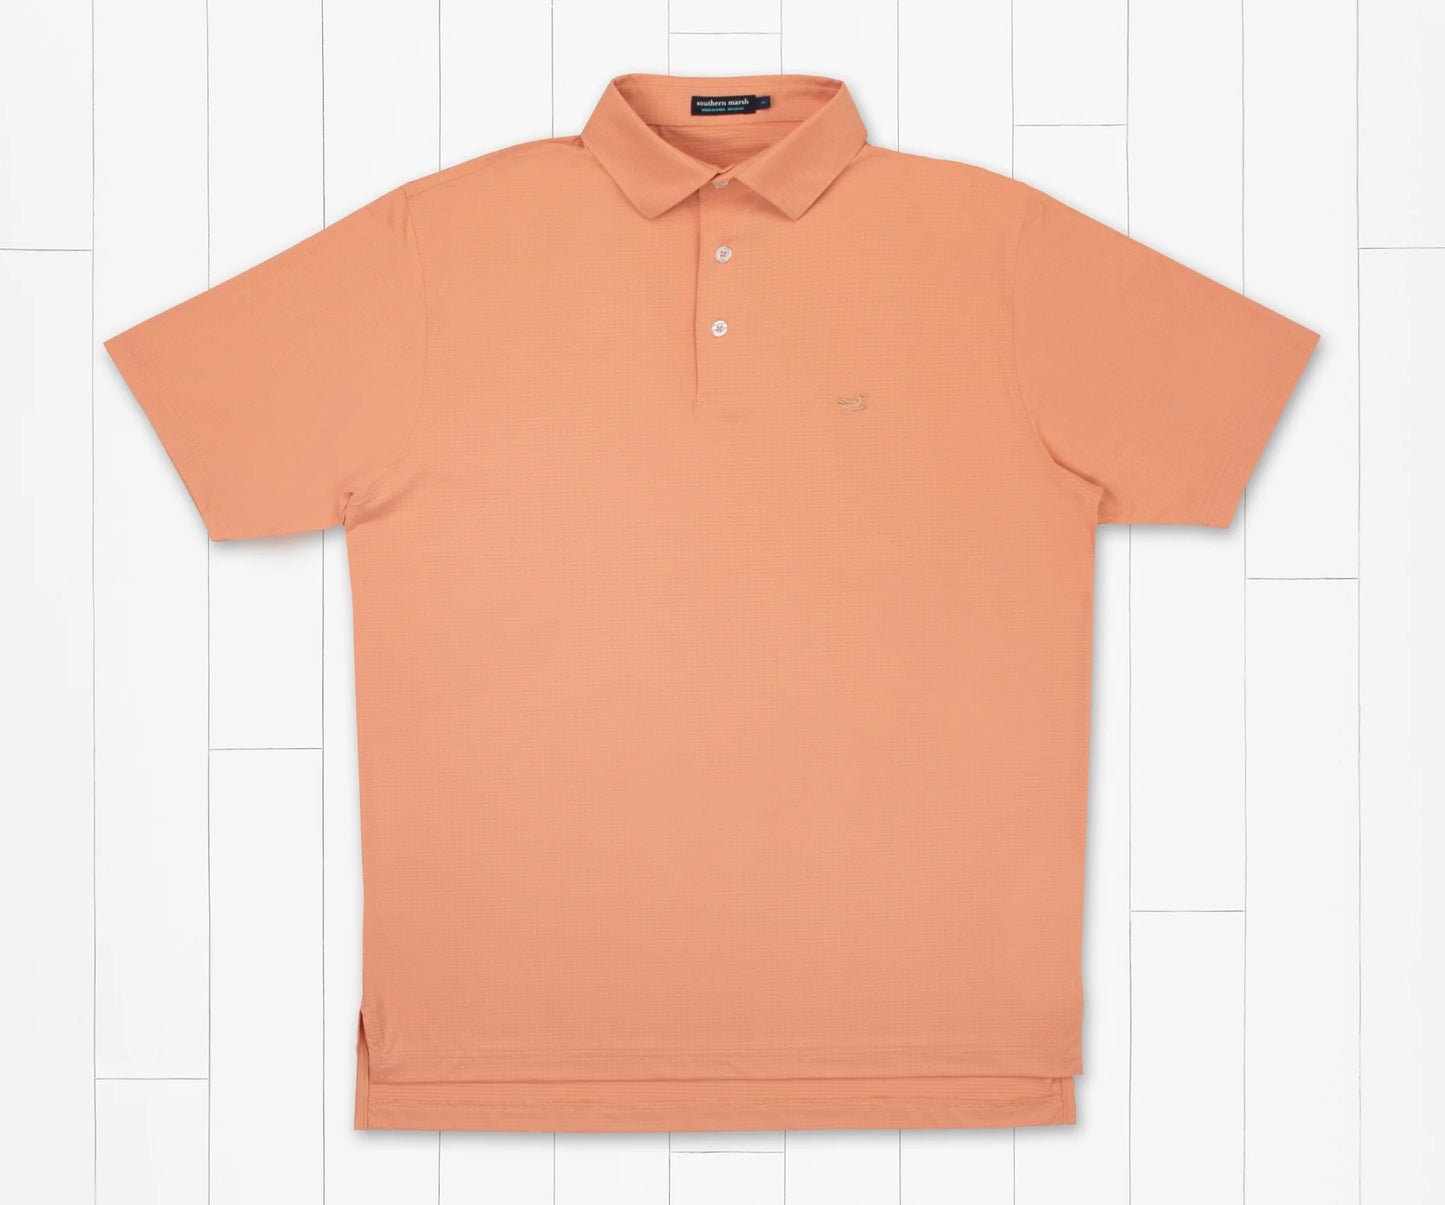 Dunmore Dots Performance Polo - Washed Peach